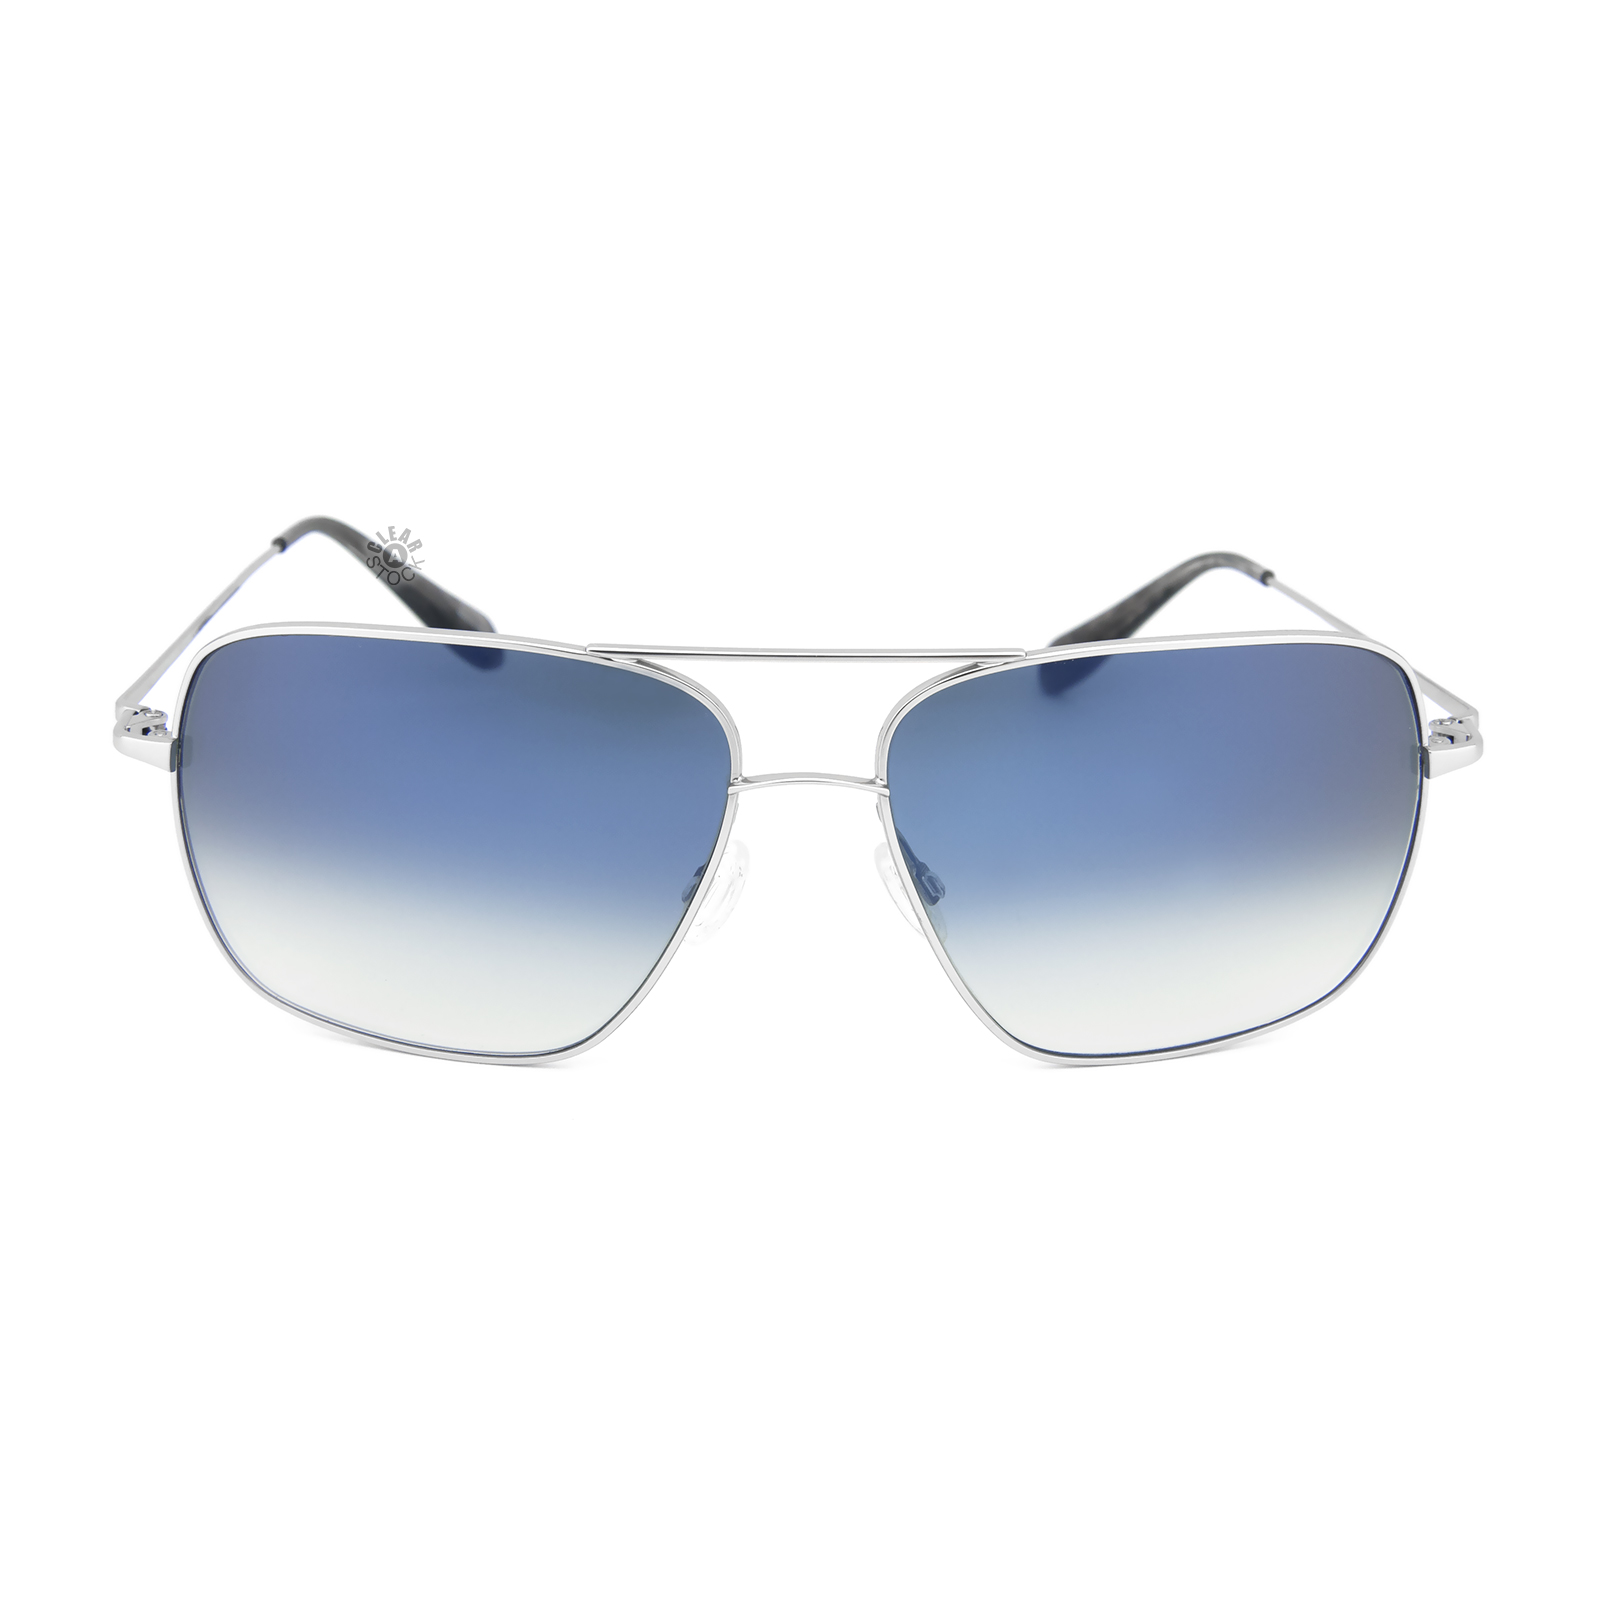 Oliver Peoples Bartley S VFX Photochromic Sunglasses